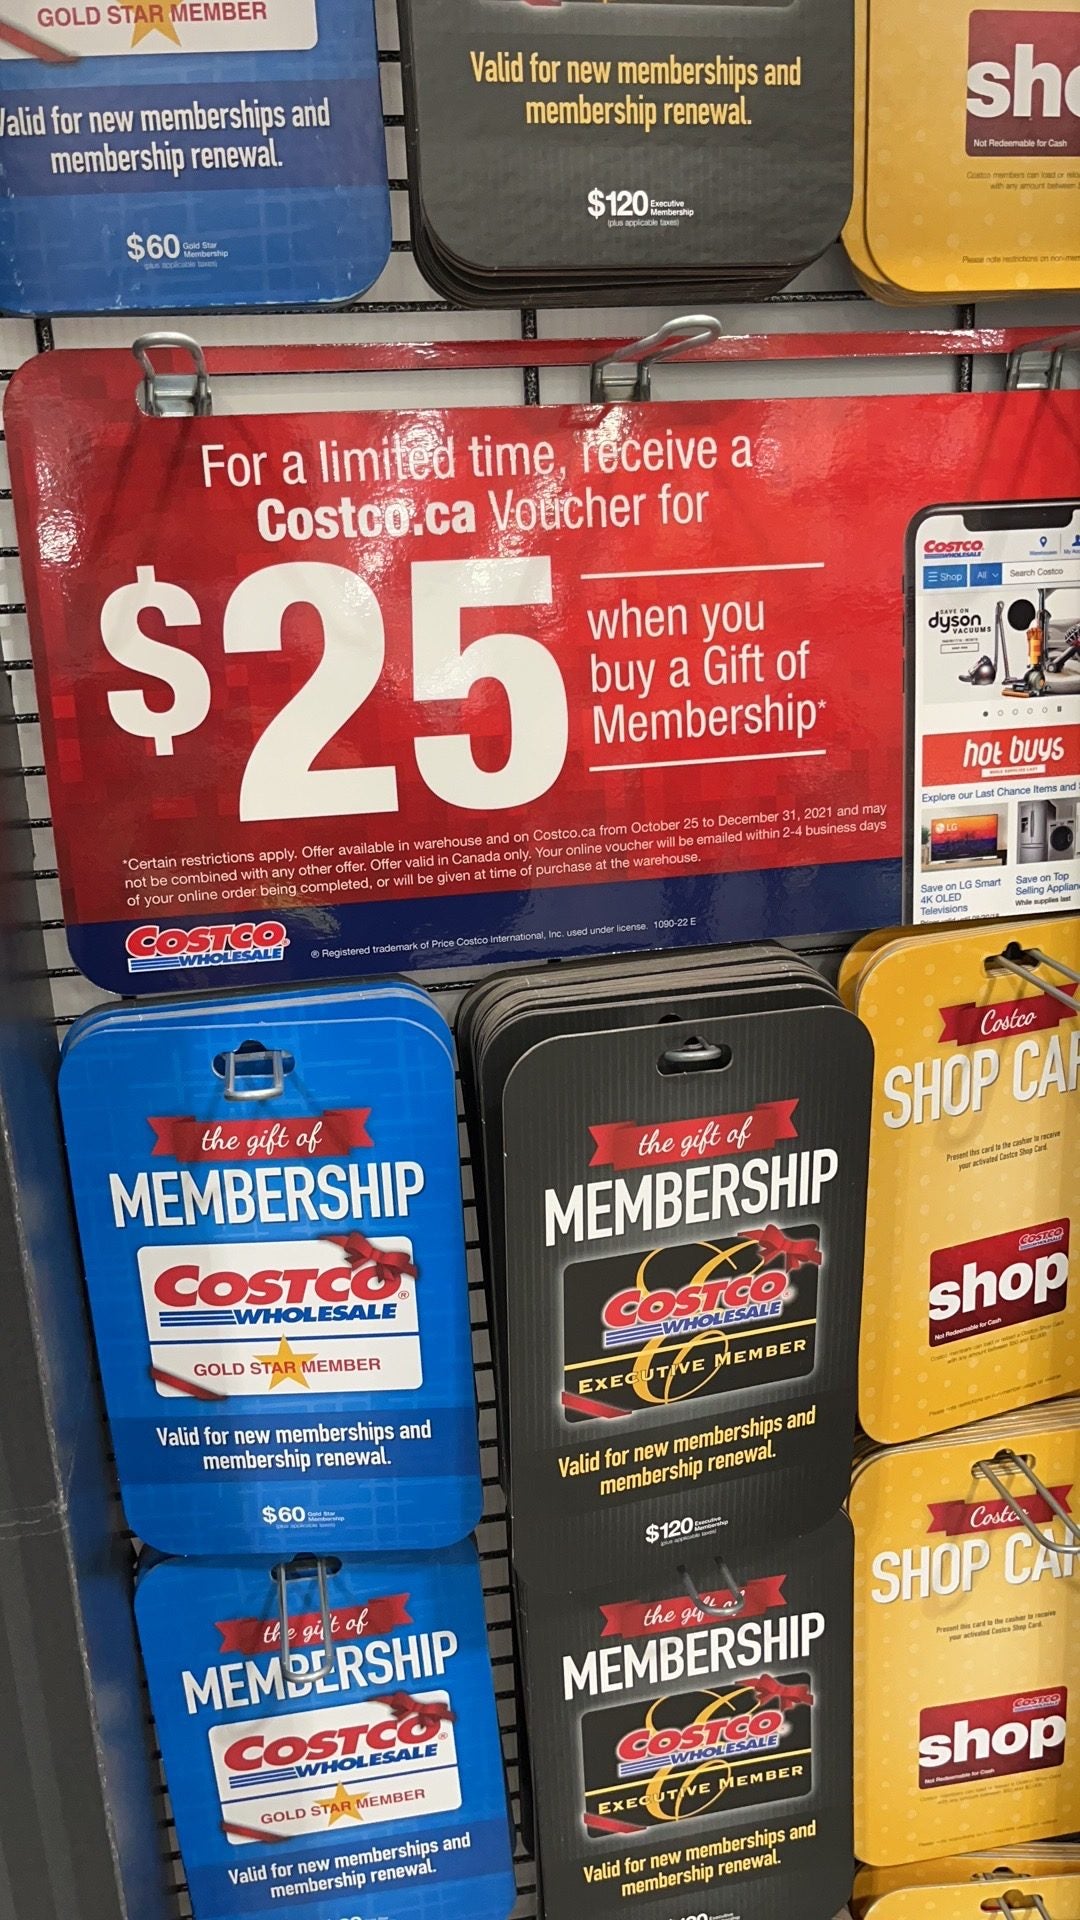 Costco] Spend $100 on P&G products and get $25 gift card - RedFlagDeals.com  Forums